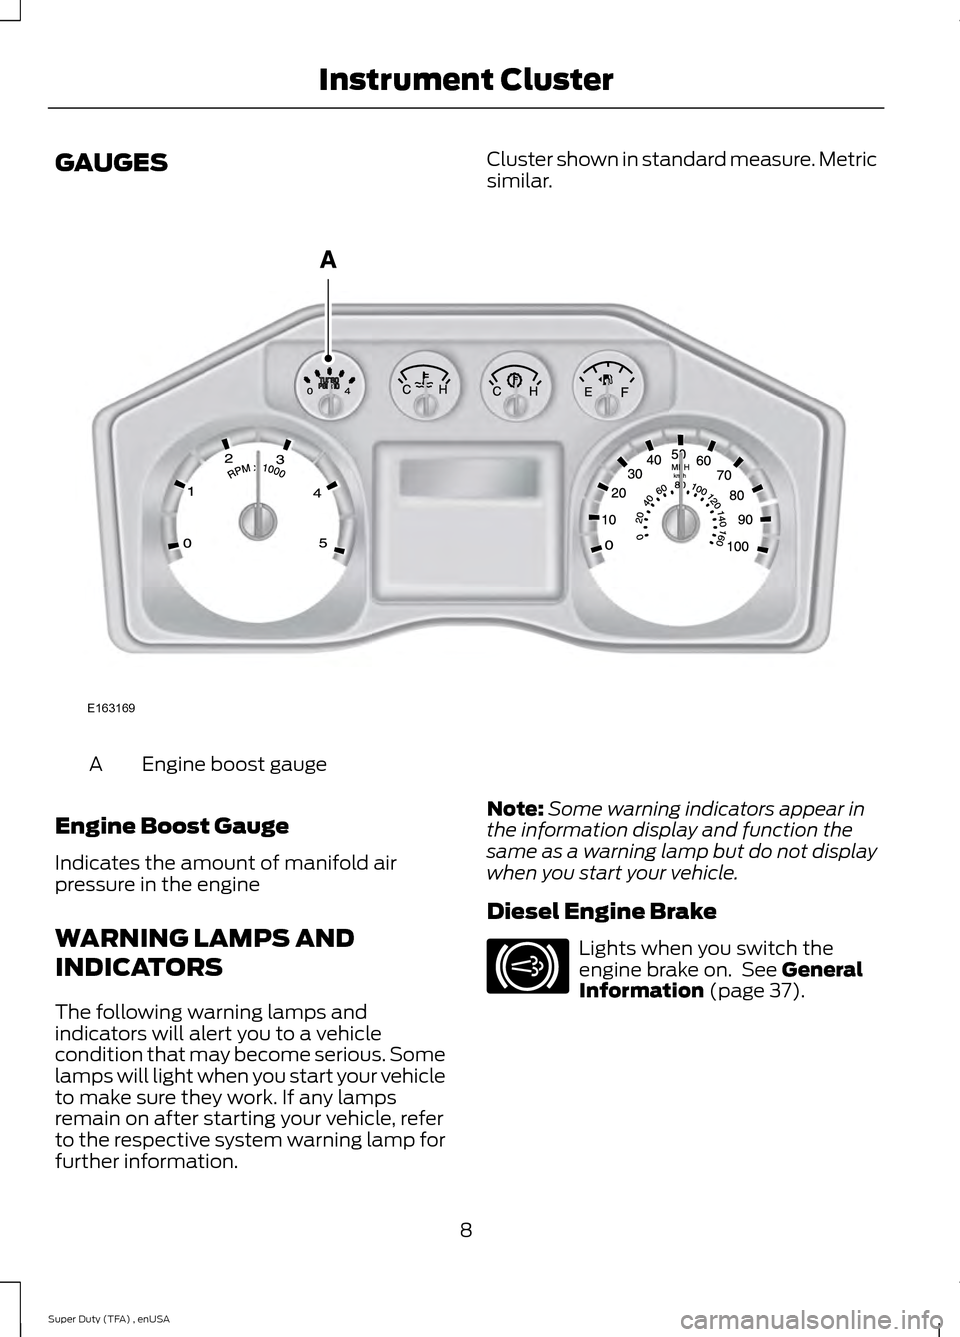 FORD SUPER DUTY 2015 3.G Diesel Supplement Manual GAUGES
Cluster shown in standard measure. Metric
similar.Engine boost gauge
A
Engine Boost Gauge
Indicates the amount of manifold air
pressure in the engine
WARNING LAMPS AND
INDICATORS
The following 